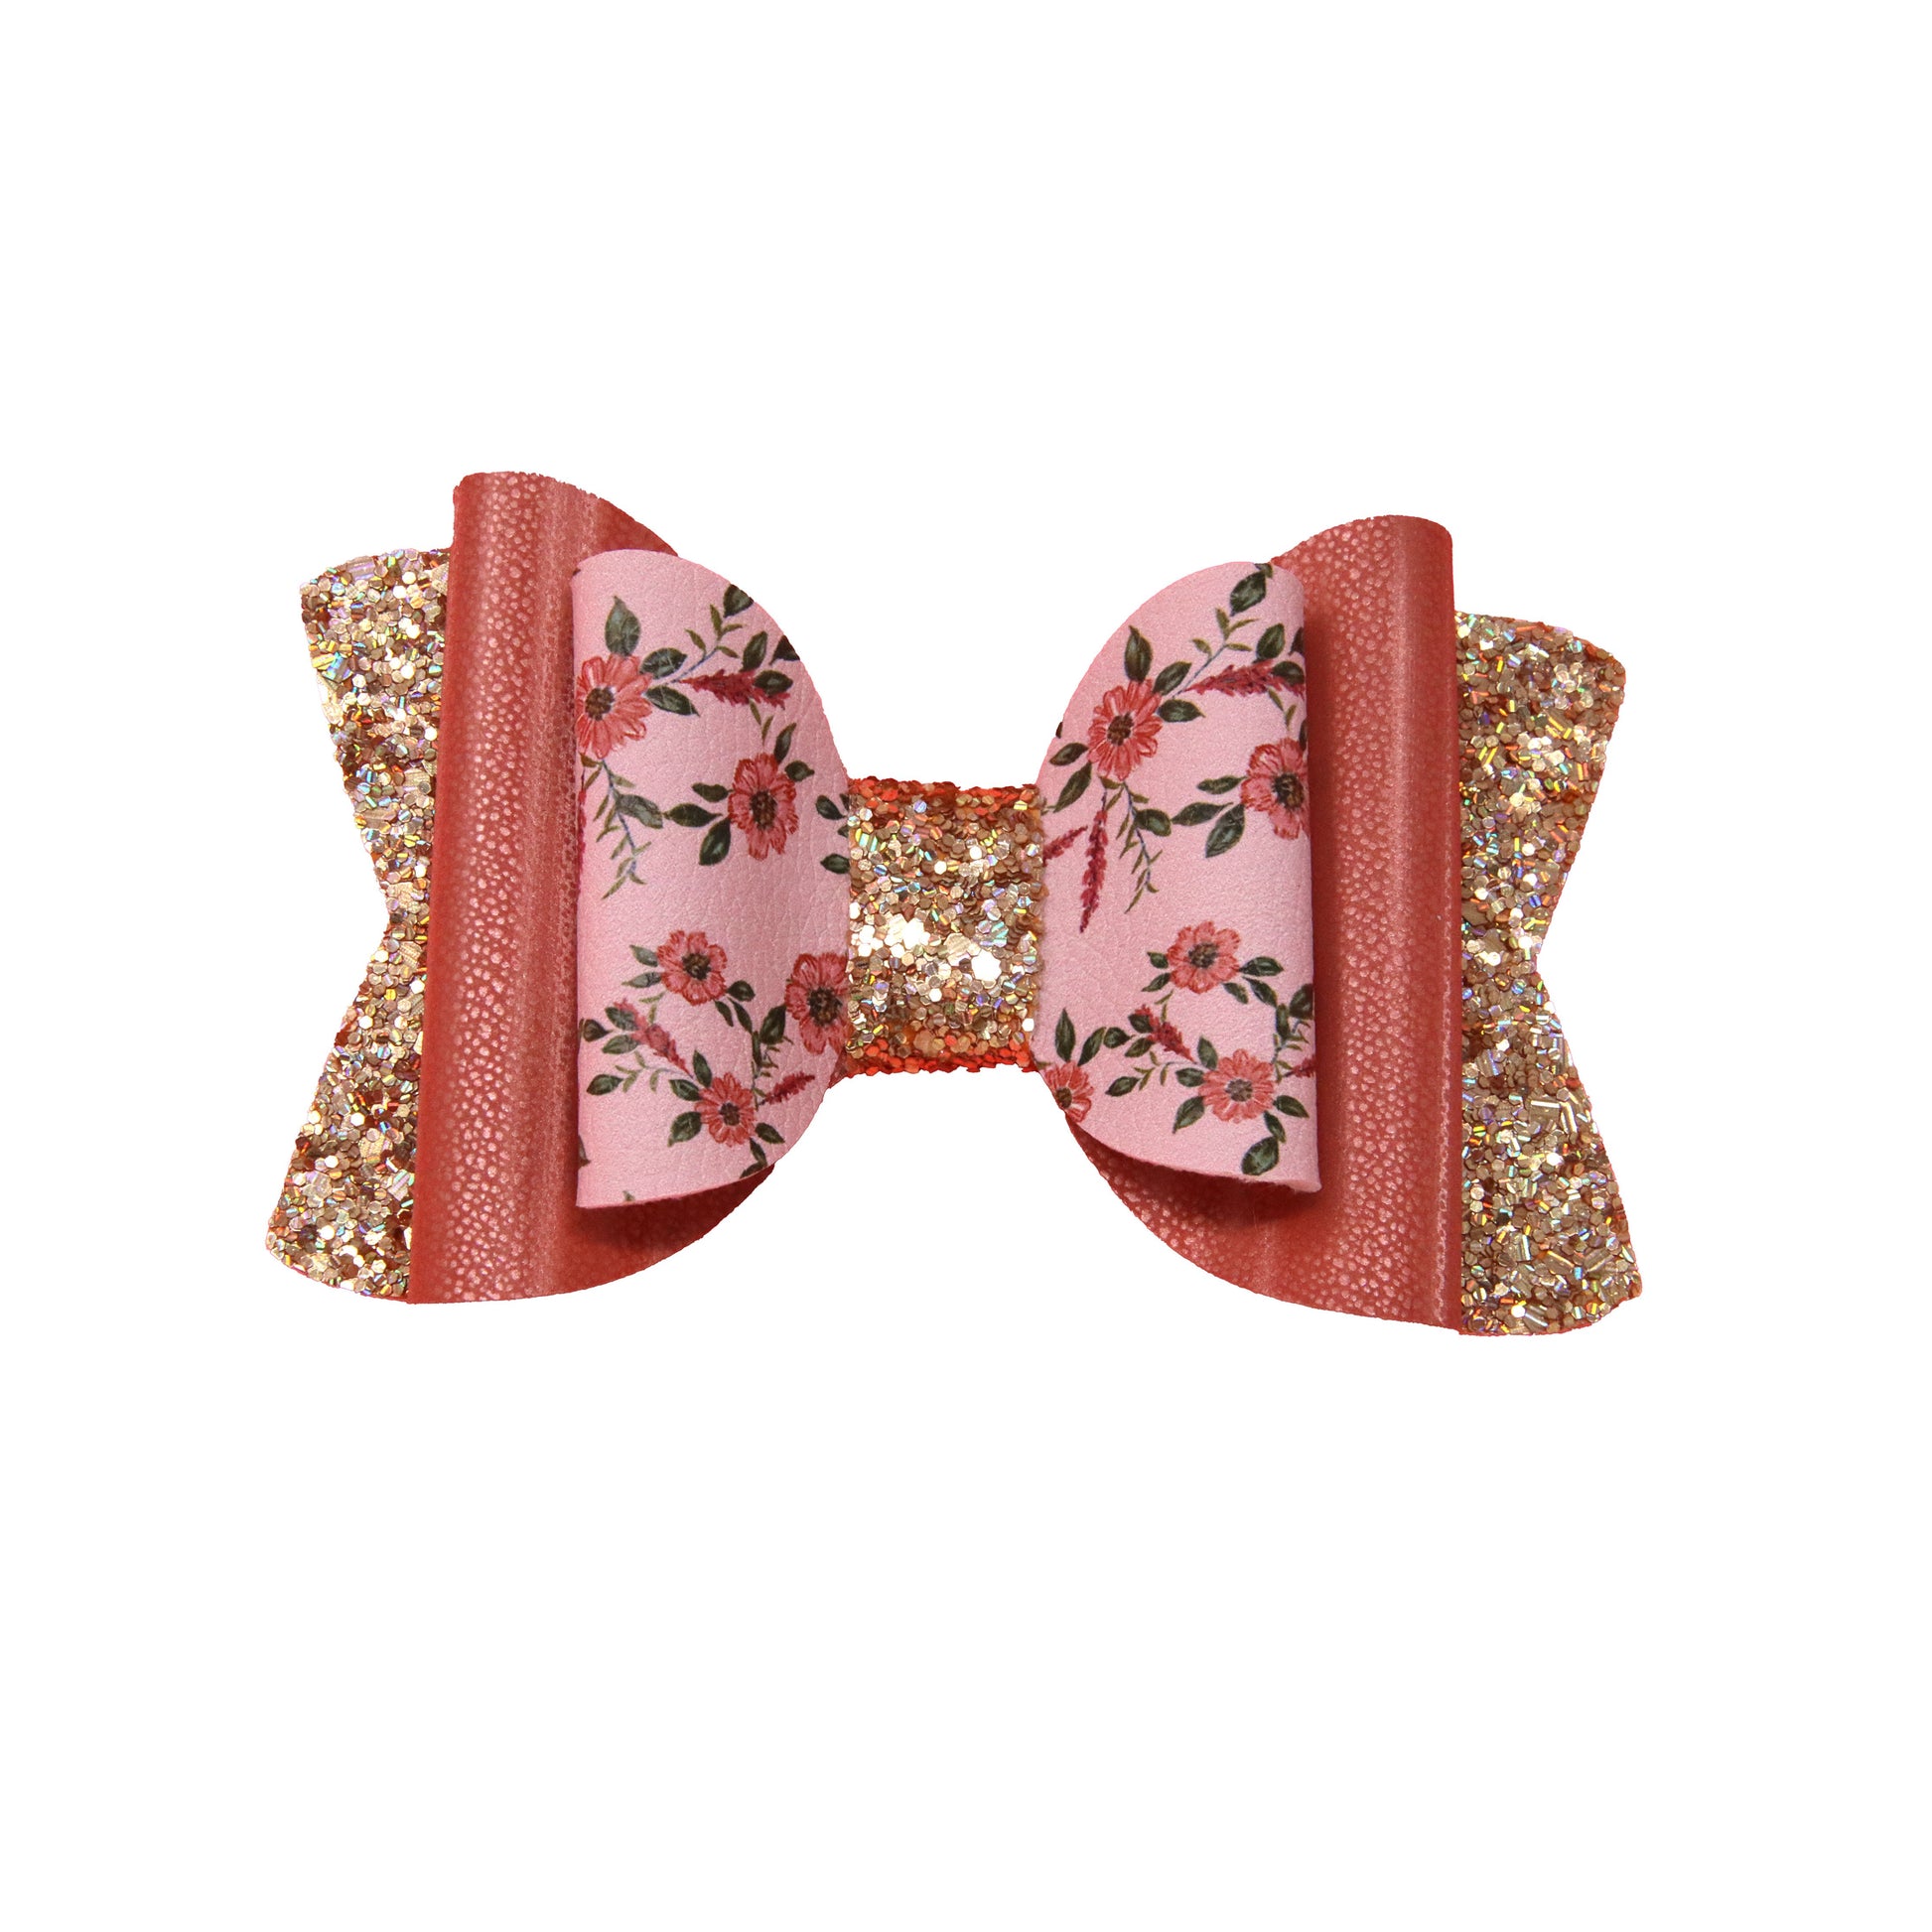 Kindred Spirit Floral Double Chloe Bow 4.5"